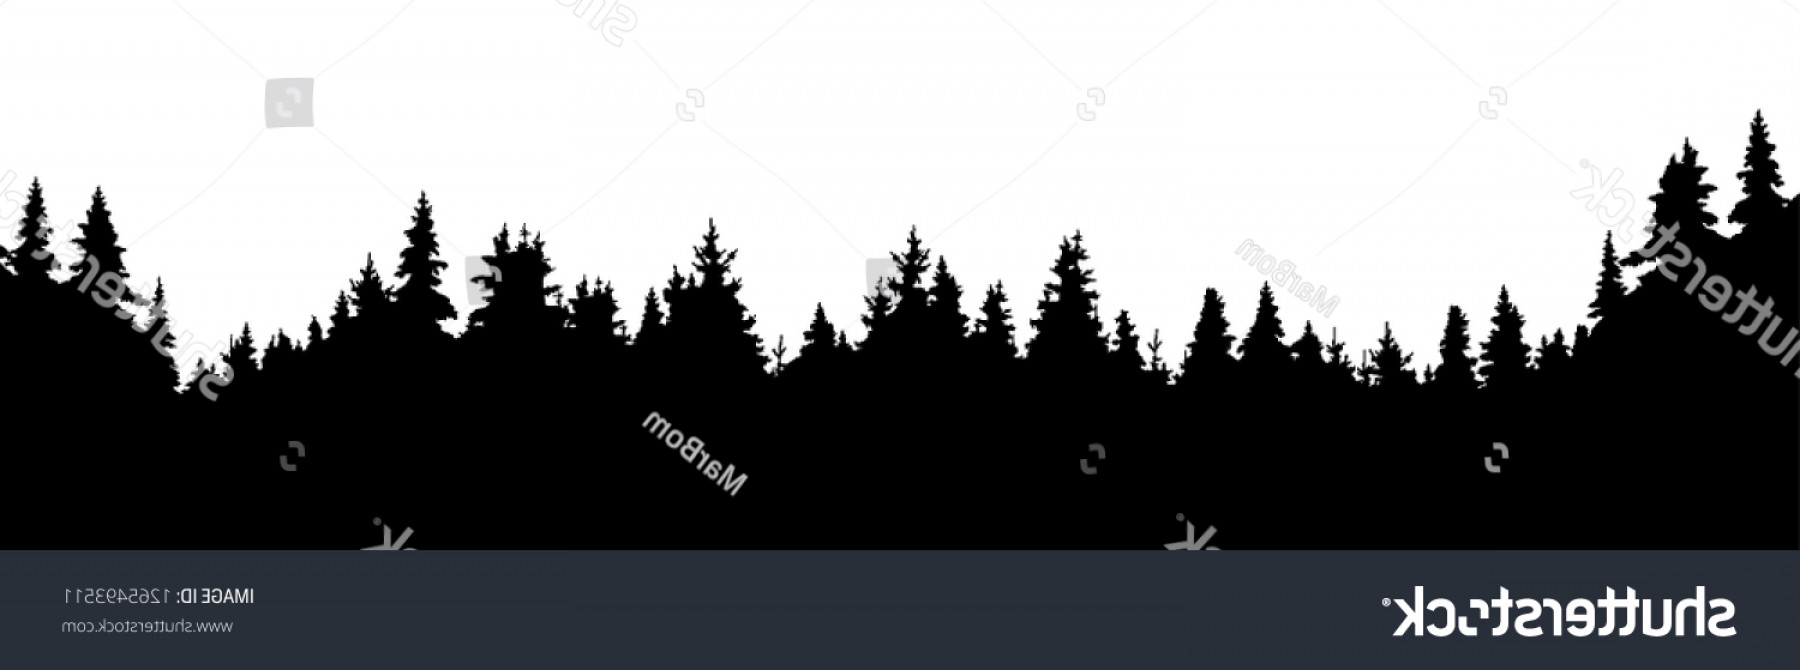 Download Tree Line Silhouette Vector at Vectorified.com | Collection of Tree Line Silhouette Vector free ...